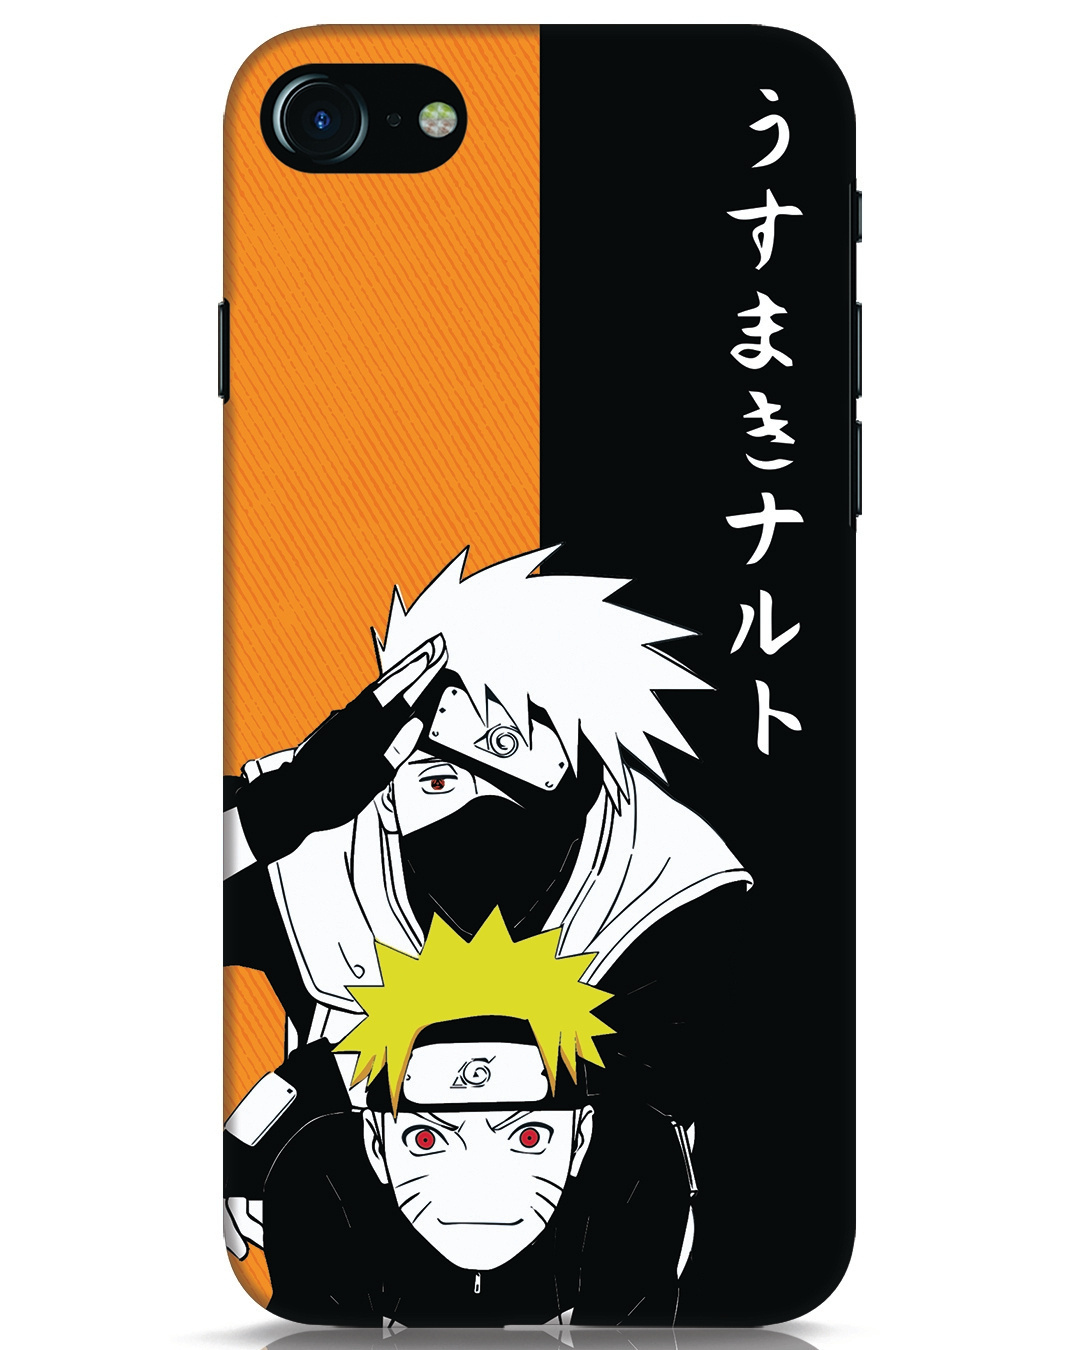 Anime My Hero Academia Theme Case for iPhone 7 Plus8 Plus 55 Inch Comic  TPU Silicone Gel Edge  PC Bumper Case Skin Protective Printed Phone Full  Protection Cover  Amazonin Electronics